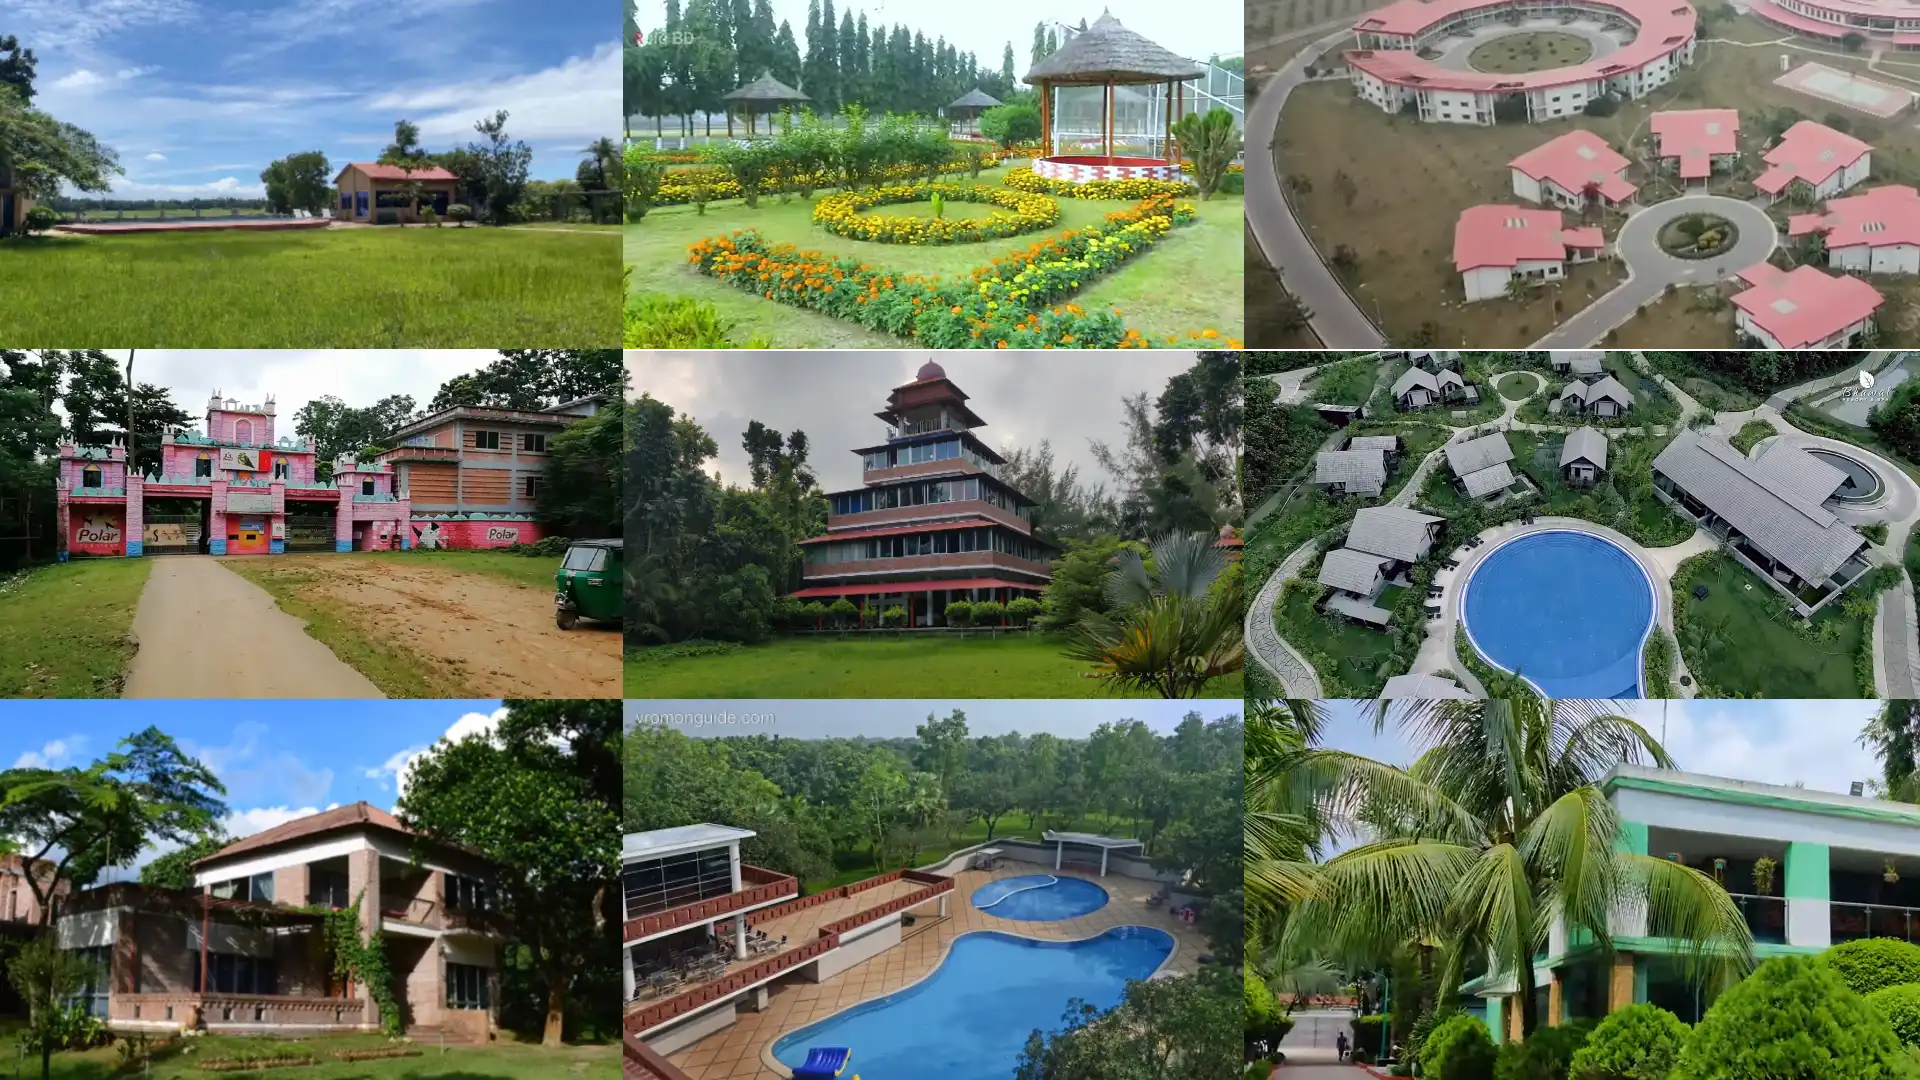 Best Resorts in Gazipur, Dhaka for Copulas, Day Out, Family